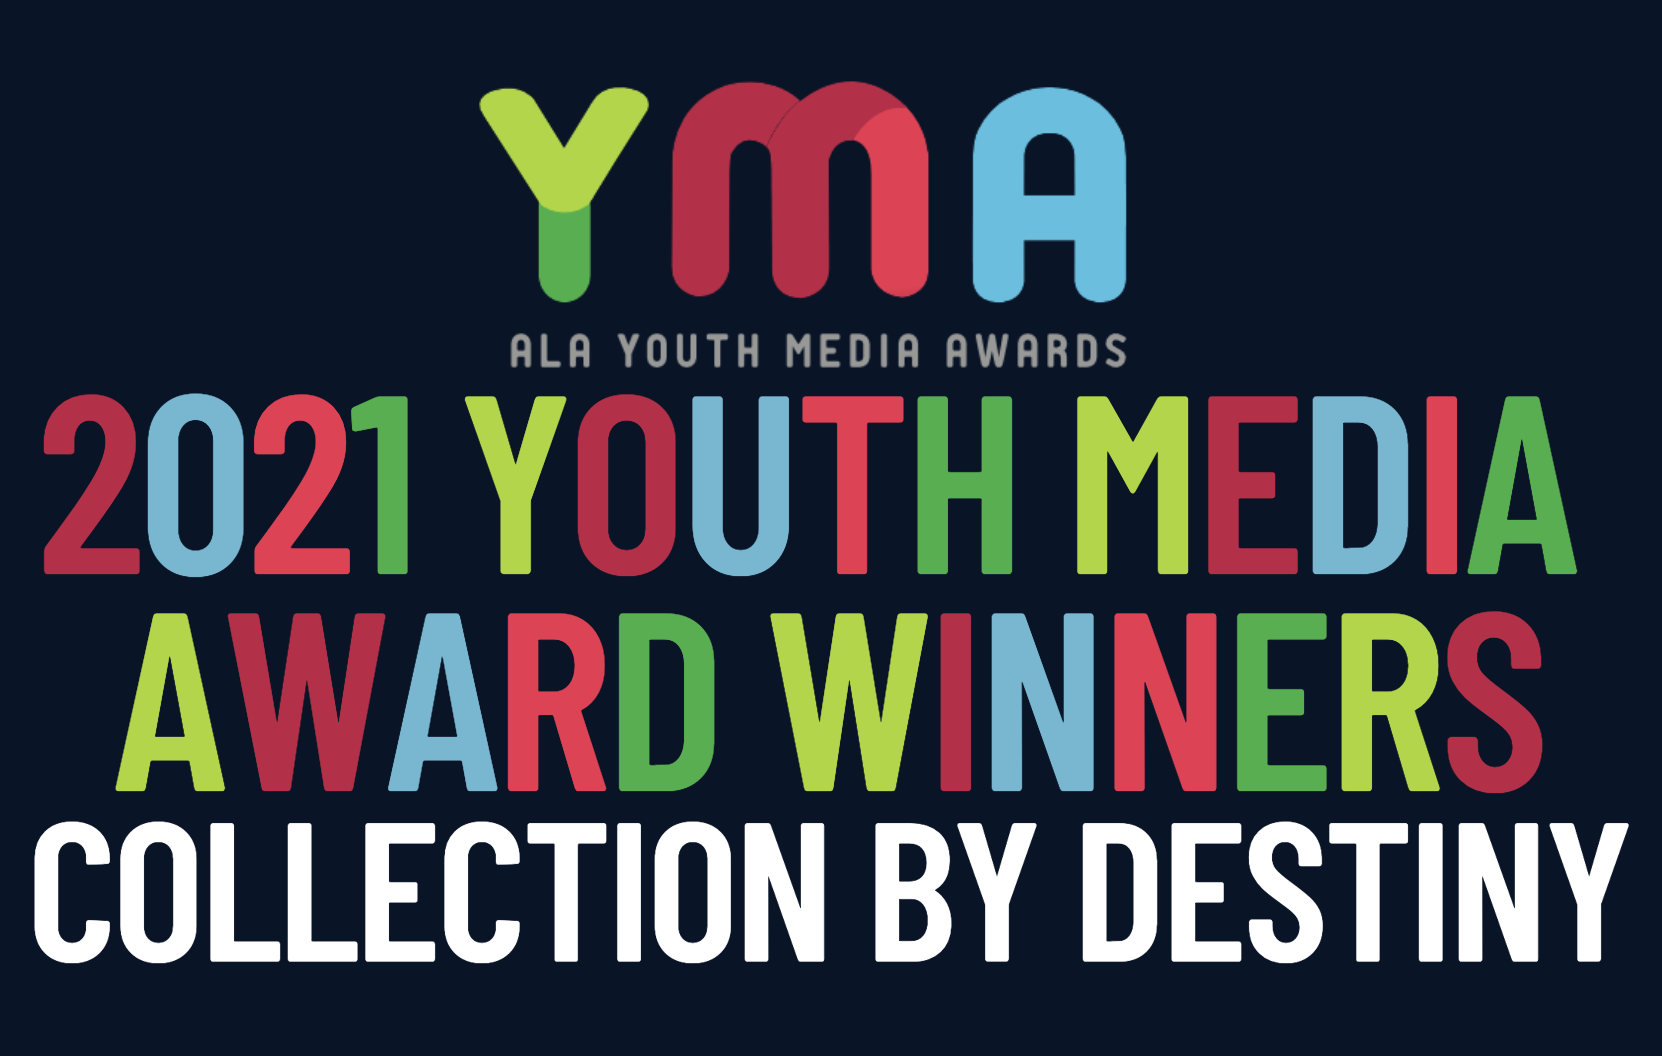 The Library Voice The 2021 Youth Media Award Winners Collection Of